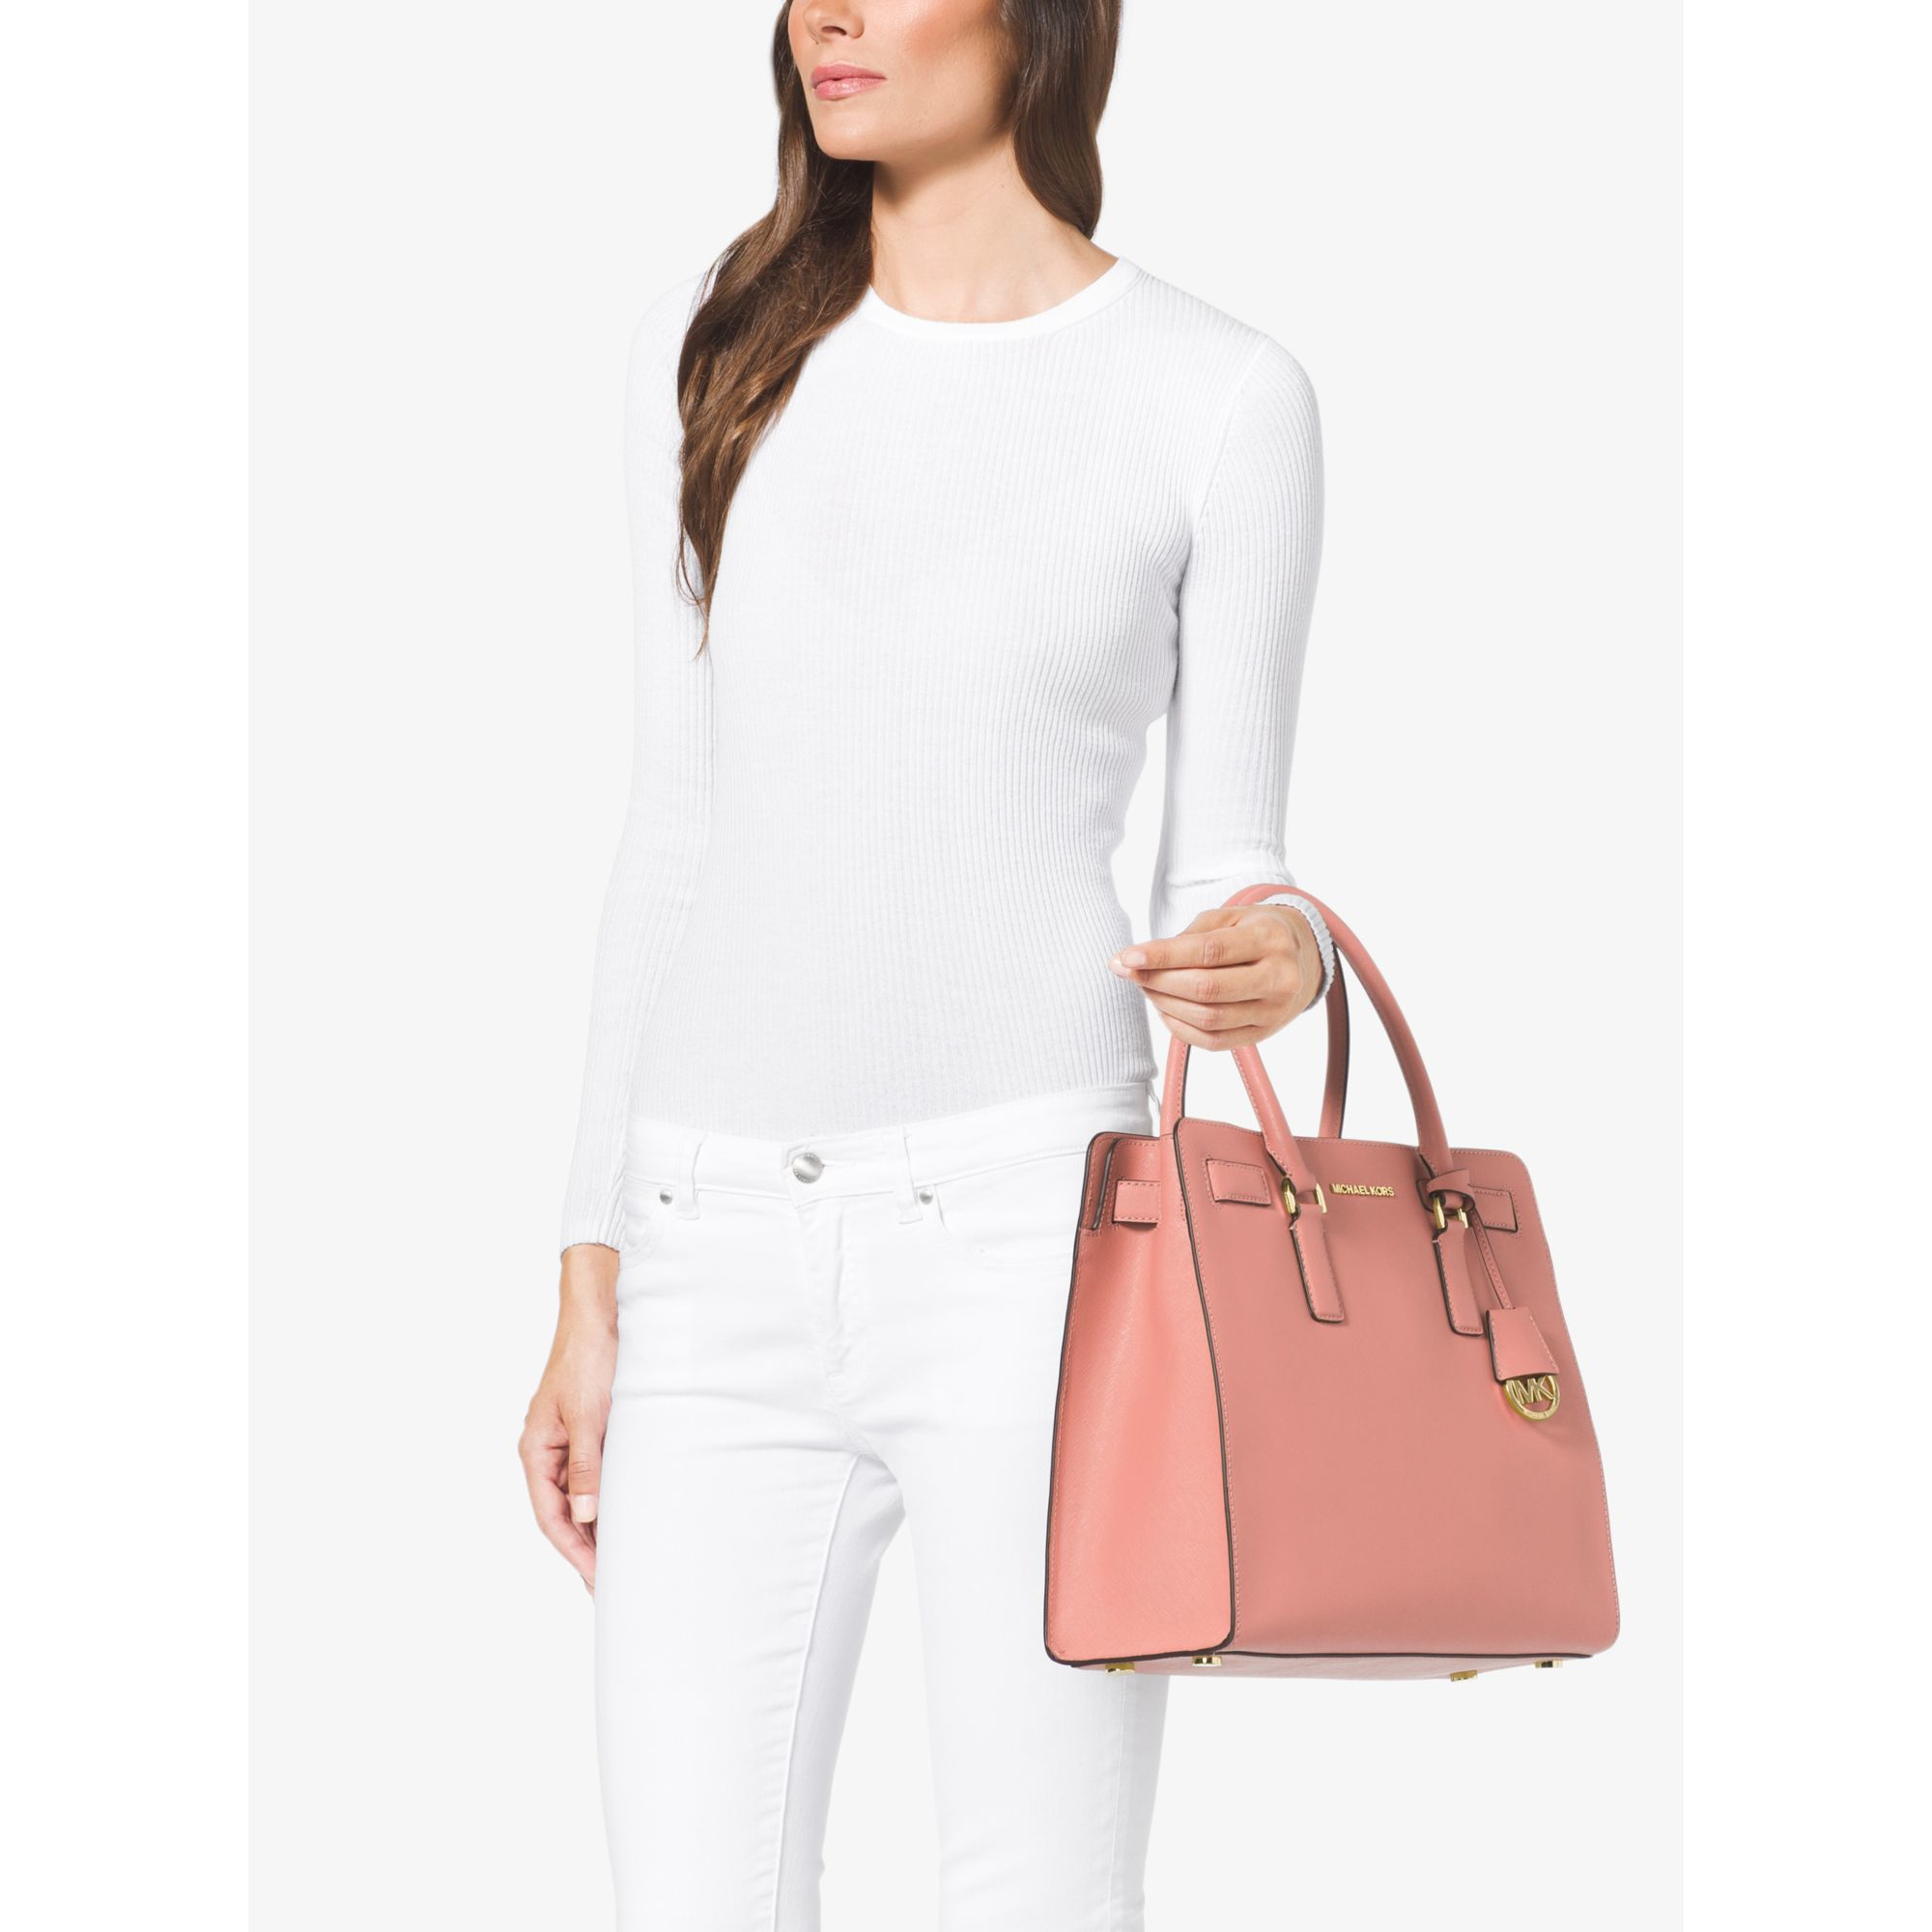 Michael Kors Dillon Large Saffiano Leather Satchel in Pale Pink (Pink) -  Lyst